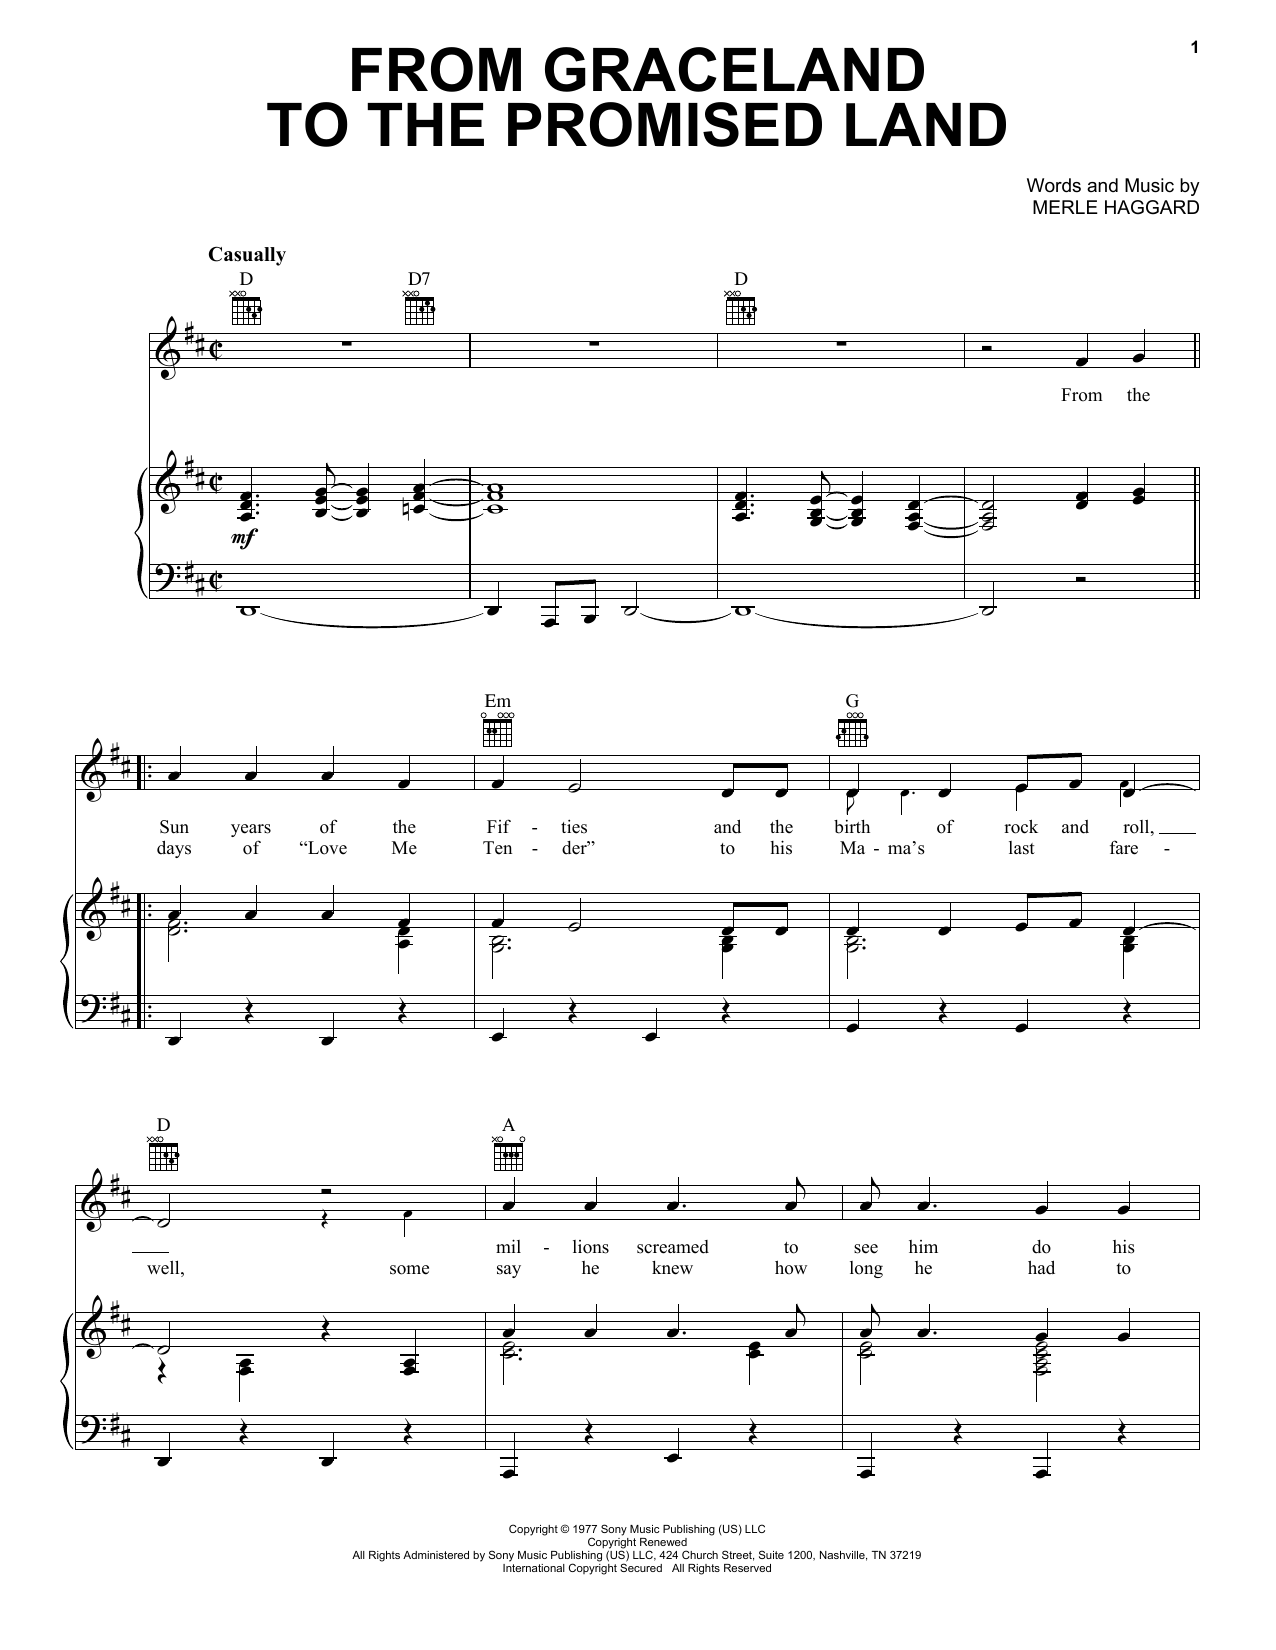 Merle Haggard From Graceland To The Promised Land sheet music notes printable PDF score